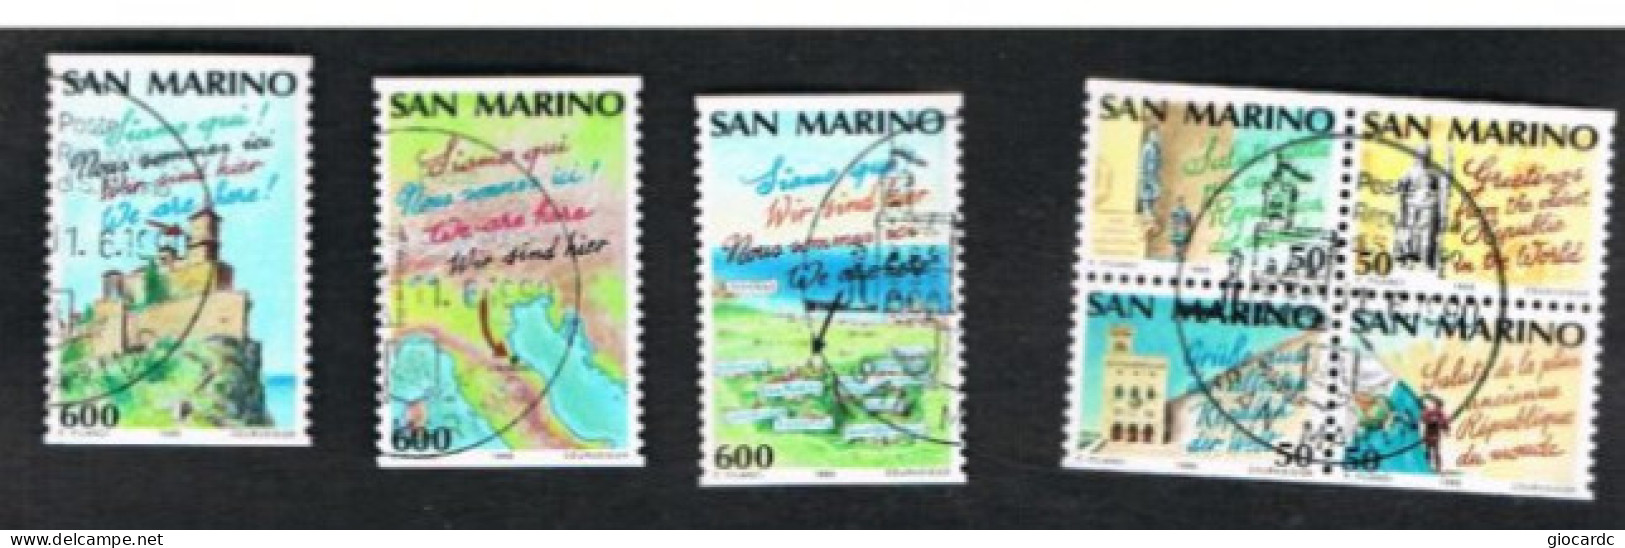 SAN MARINO UN 1289.1295  - 1990 ANNO DEL TURISMO (COMPLET SET OF 7 STAMPS, 4 SE-TENANT - BY BOOKLET)  - USED - Gebraucht